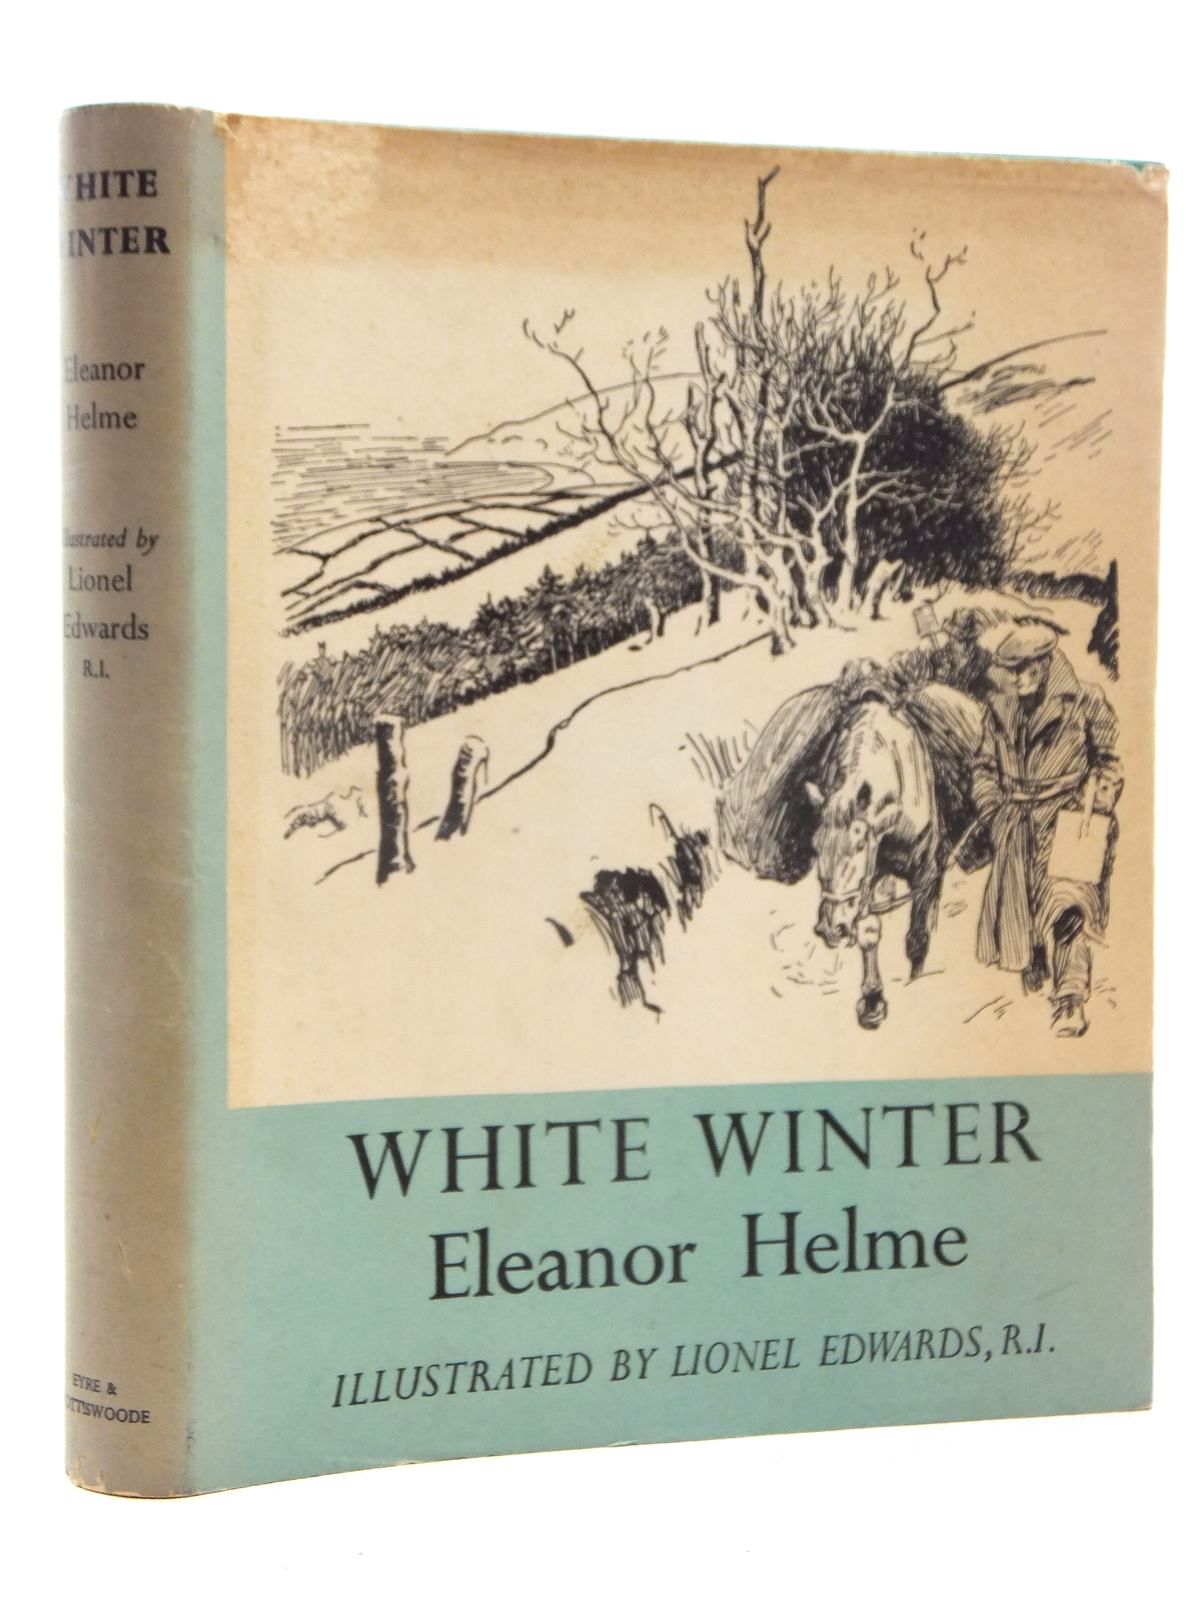 Cover of WHITE WINTER by Eleanor Helme